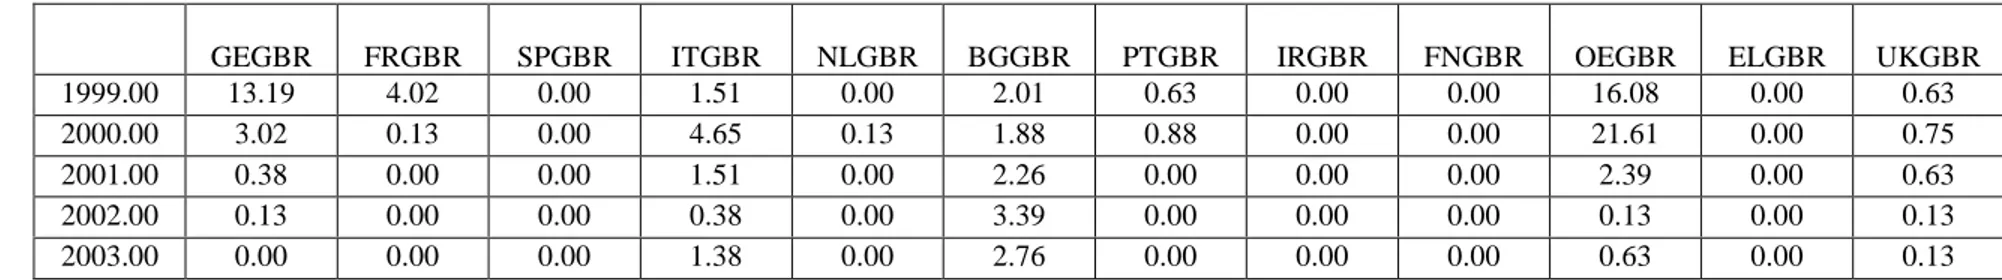 Table 7: Probability of Government budget deficit ratio exceeding 3% under Rule 1